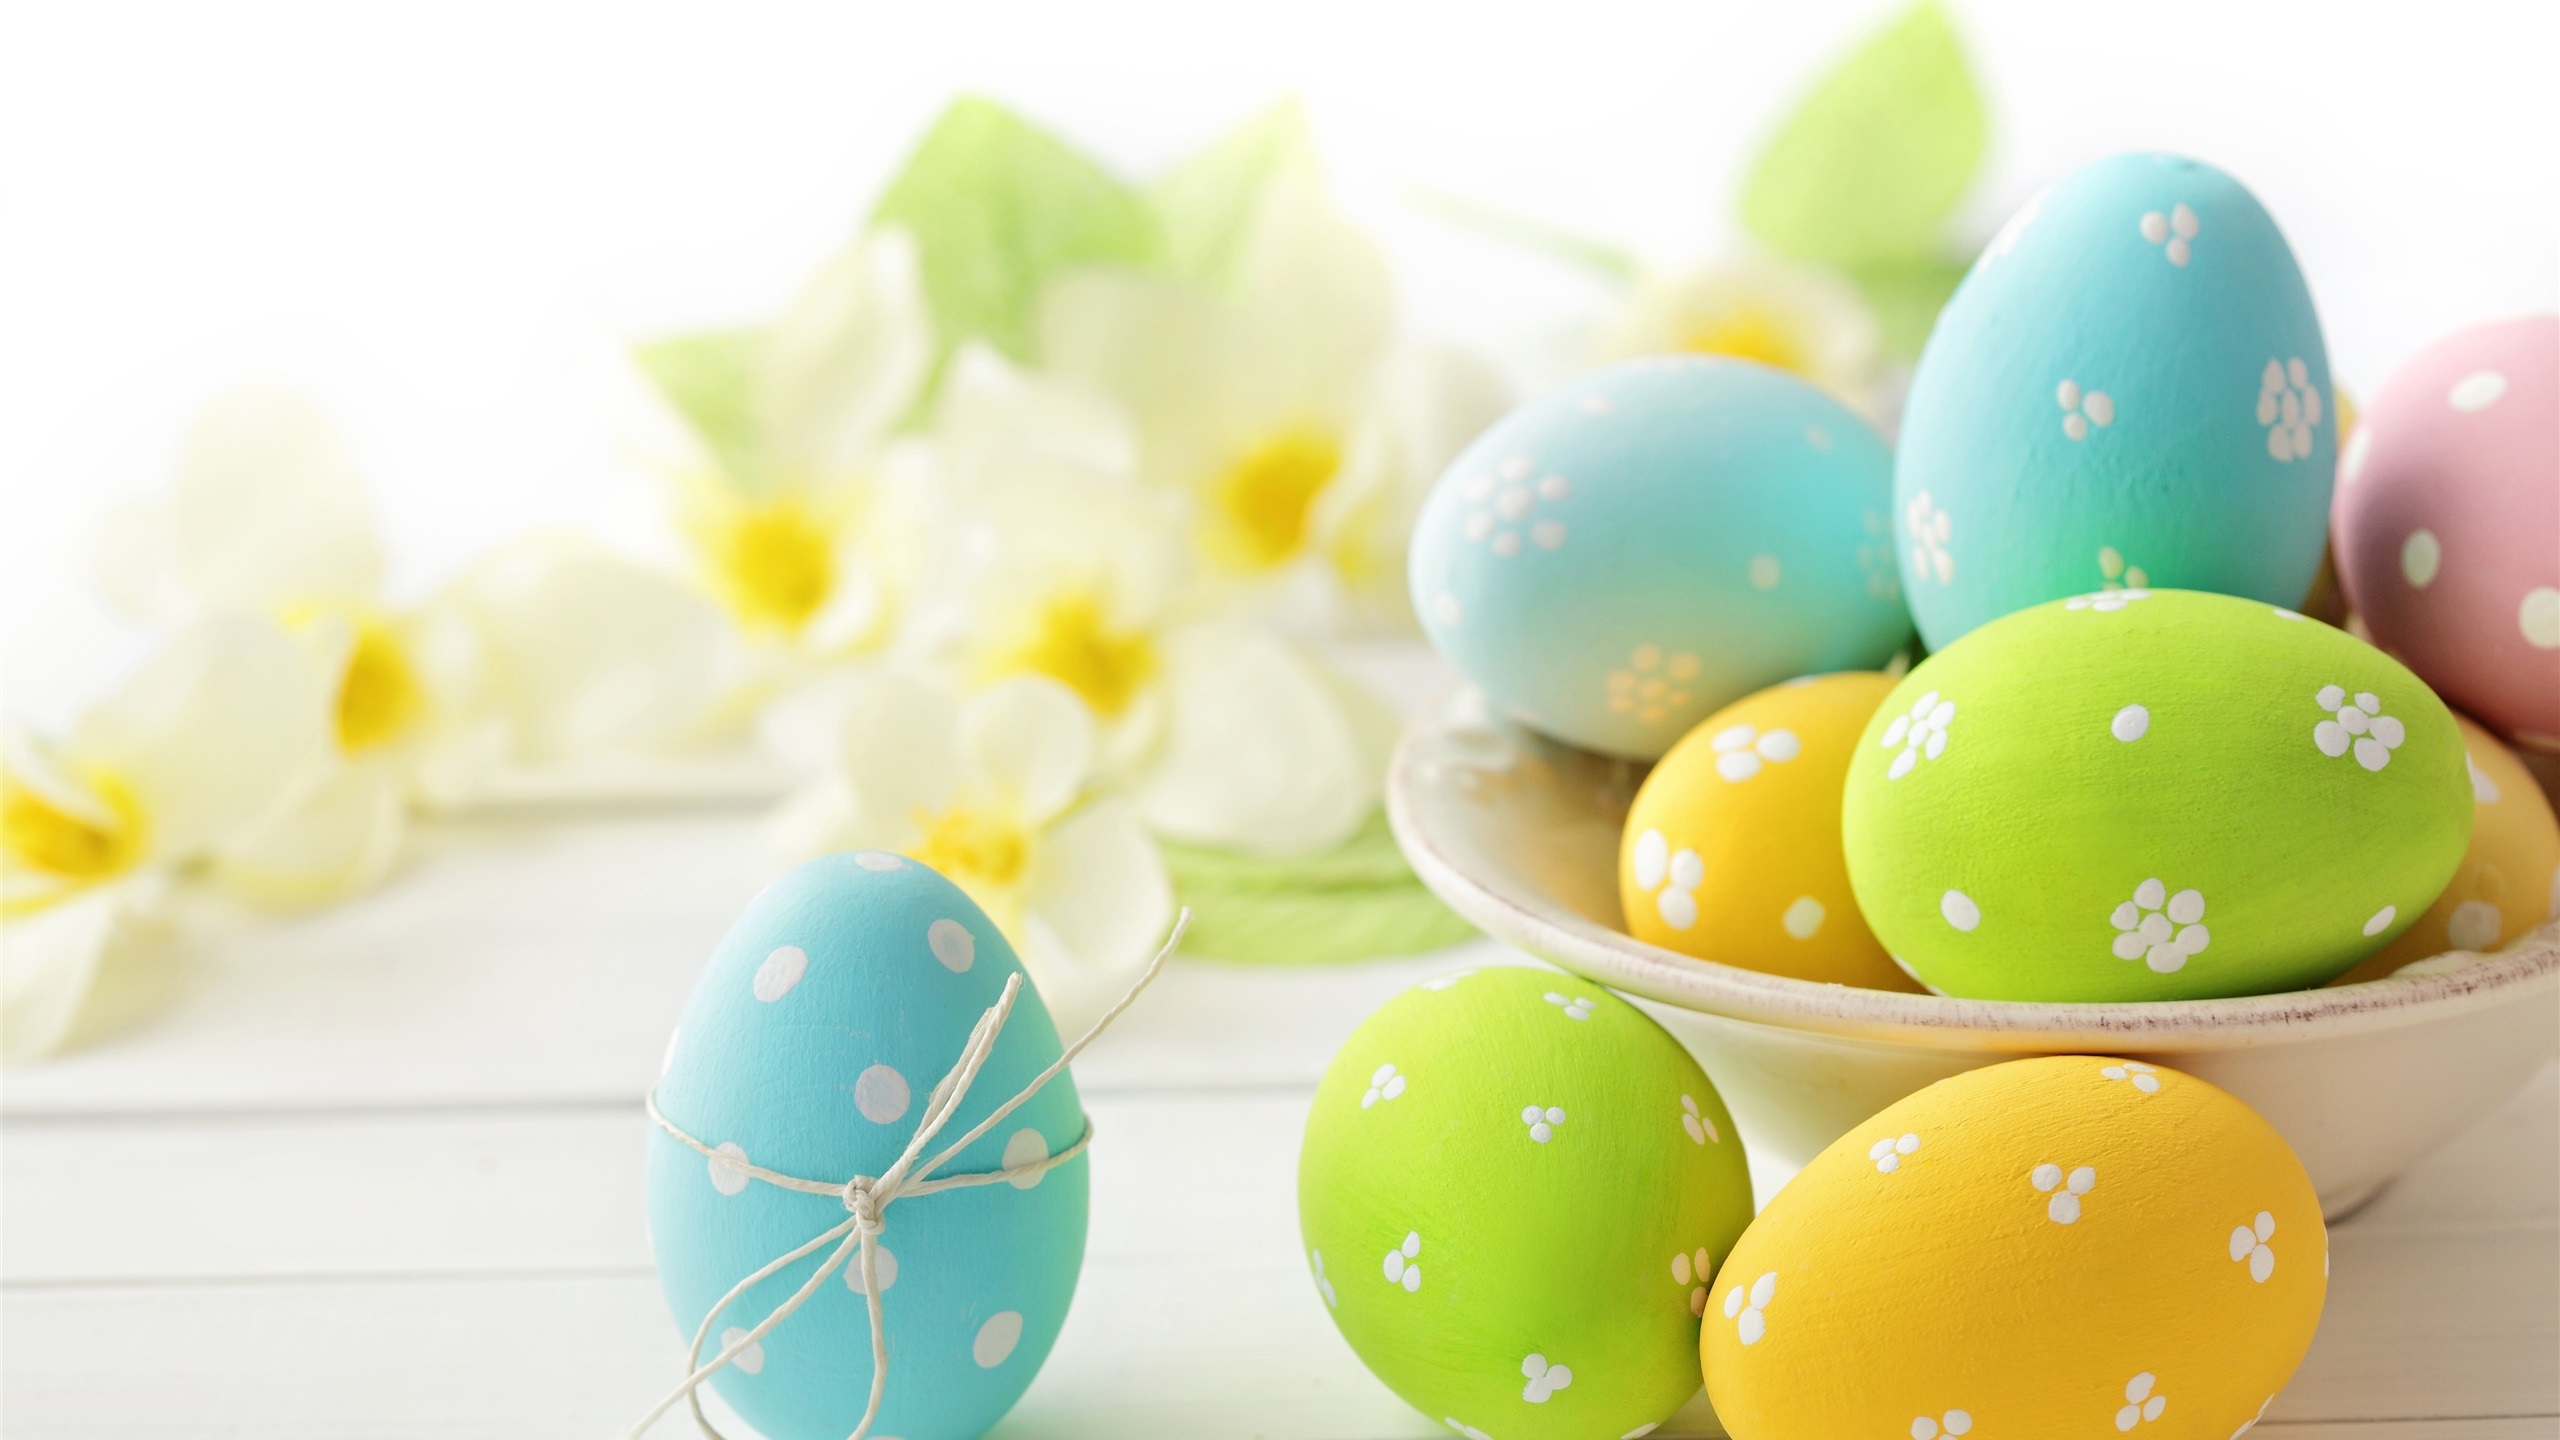 General 2560x1440 eggs easter eggs flowers cup bright colorful closeup